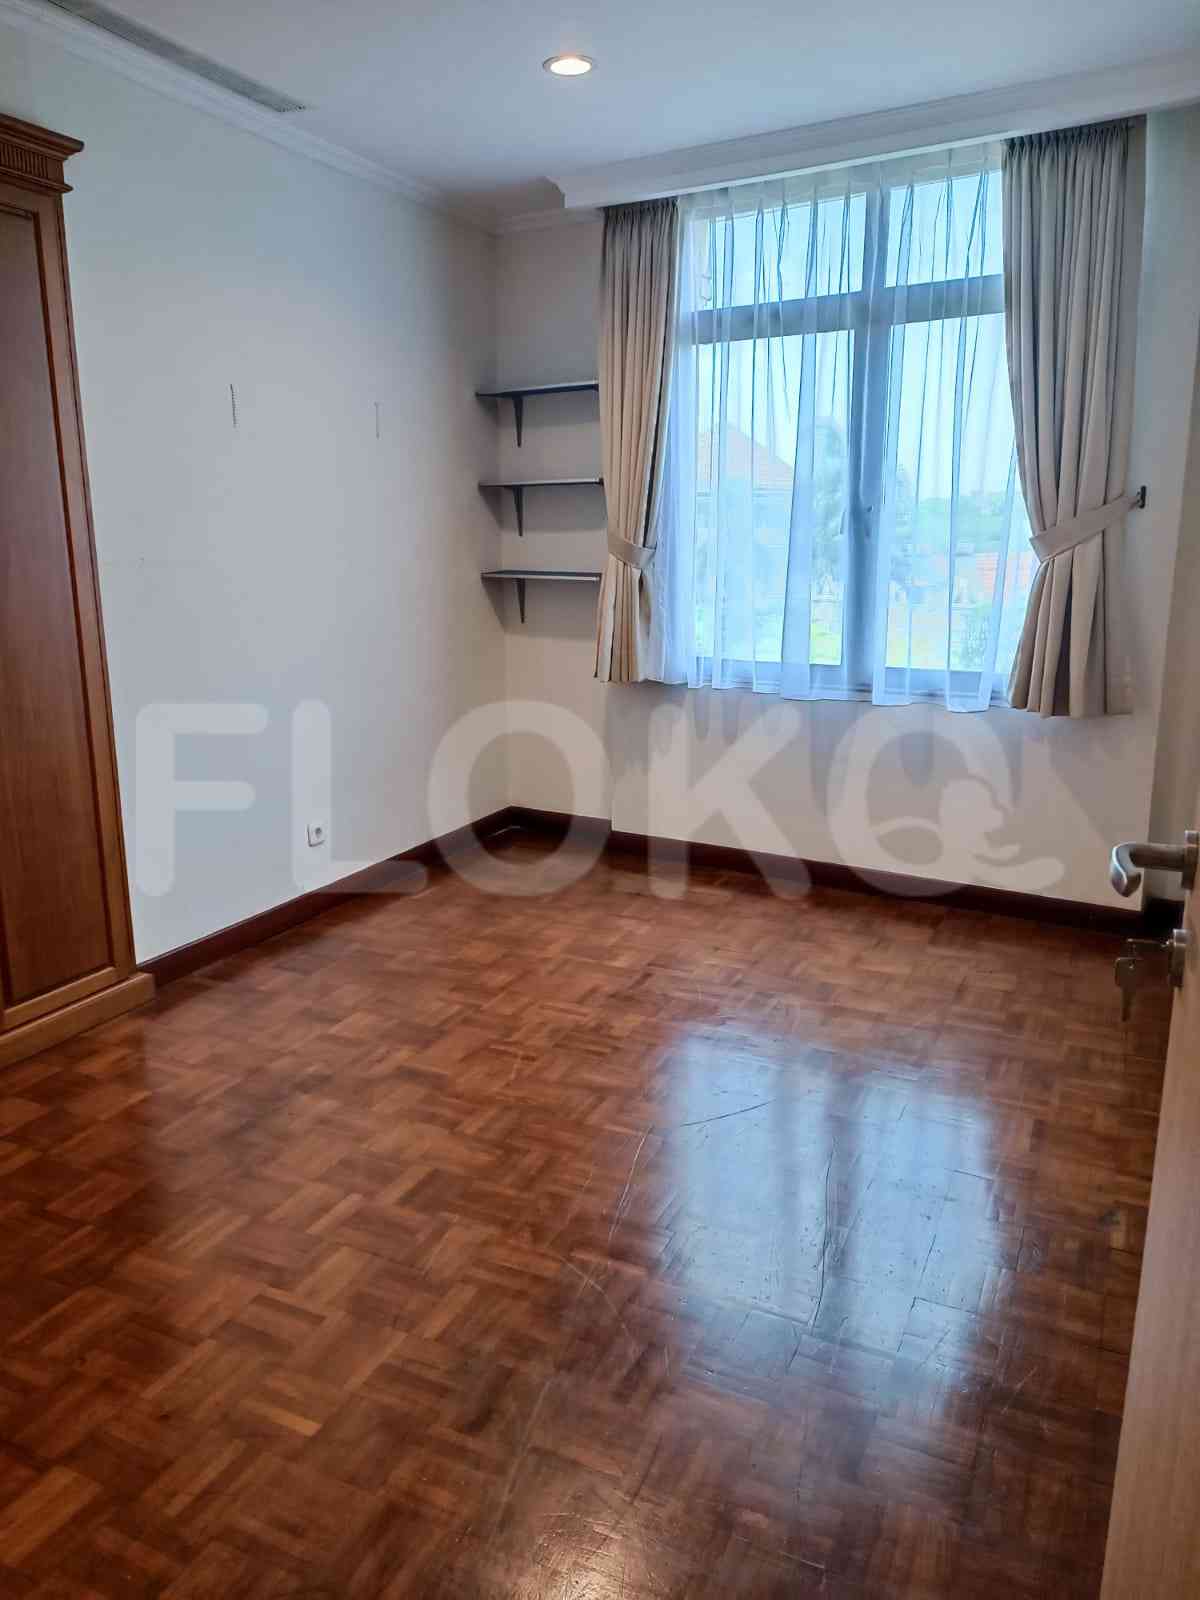 3 Bedroom on 18th Floor for Rent in Kusuma Chandra Apartment  - fsuf85 4